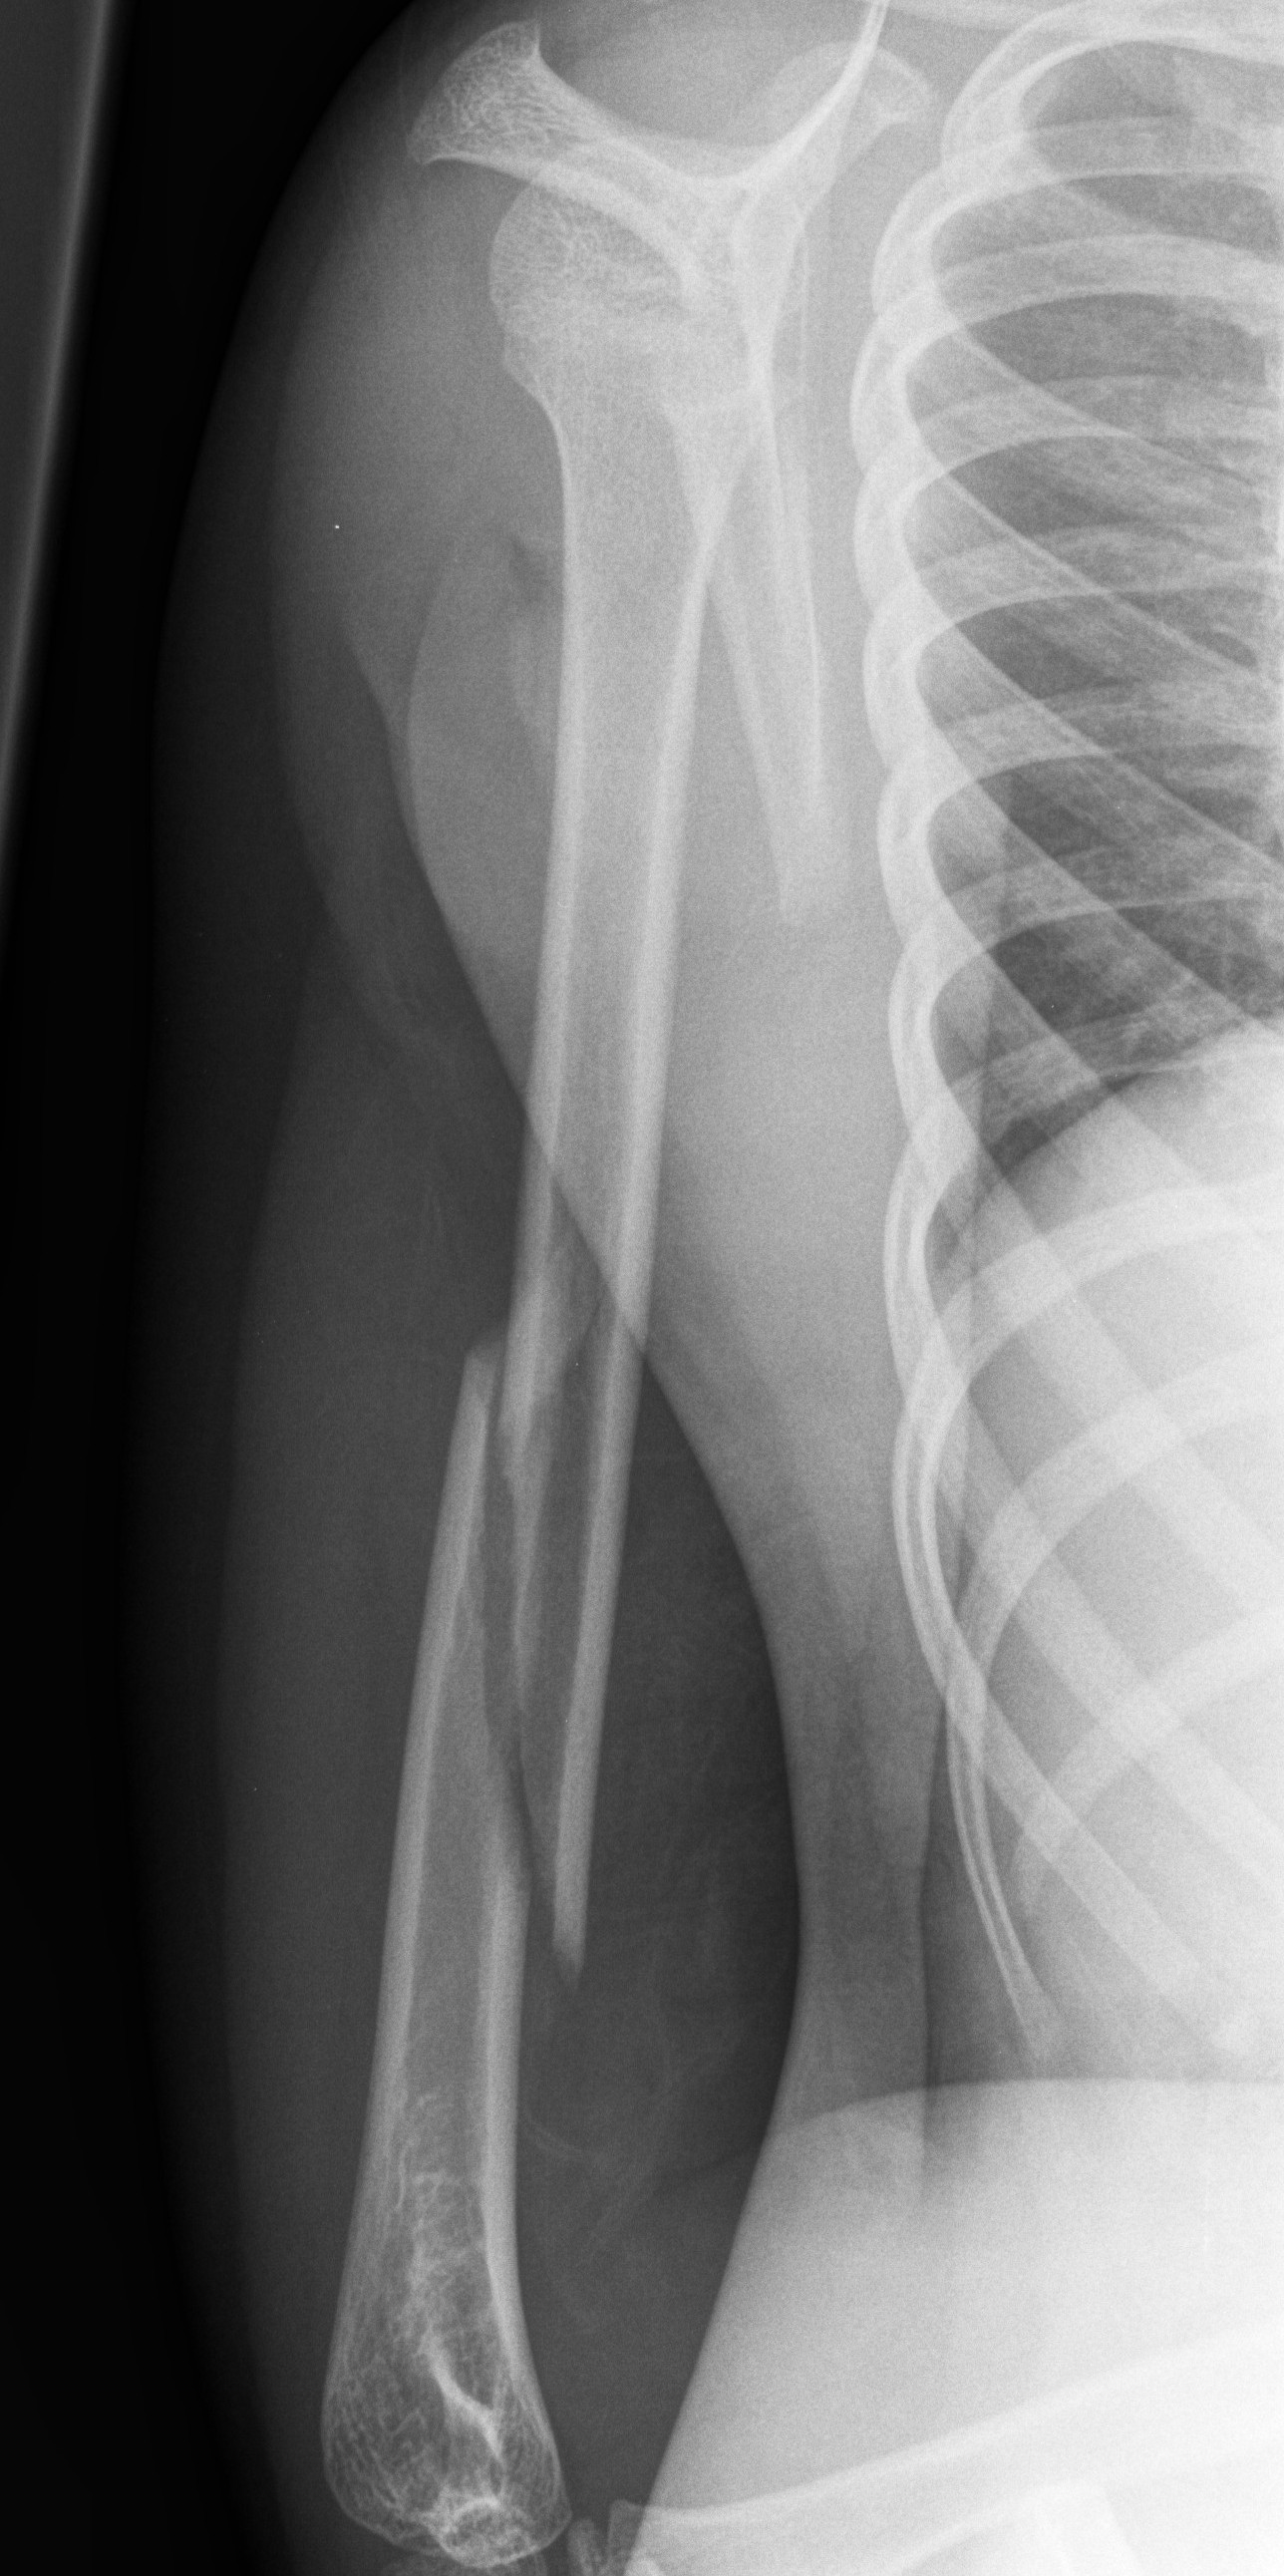 A spiral fracture of shaft of humerus